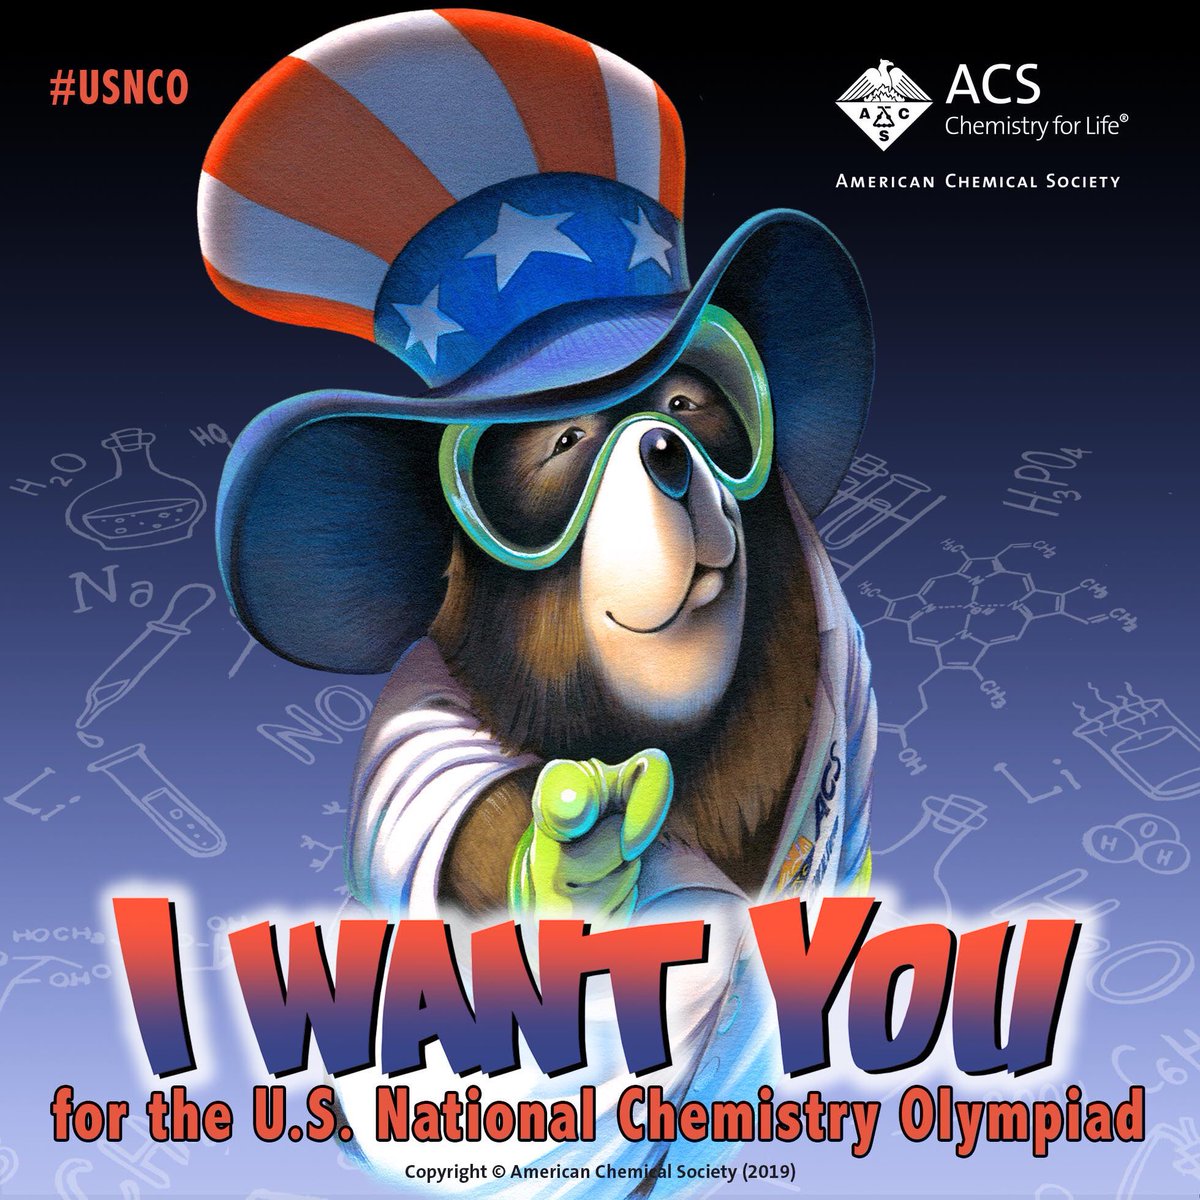 Announcing the ACS Brazosport will be participating the 2020 US National Chemistry Olympiad! Local competition on March 6 evening at Dow Diamond Center in Lake Jackson. Register today at: surveymonkey.com/r/JRQCG27
#acs #usnco #chemistryolympiad